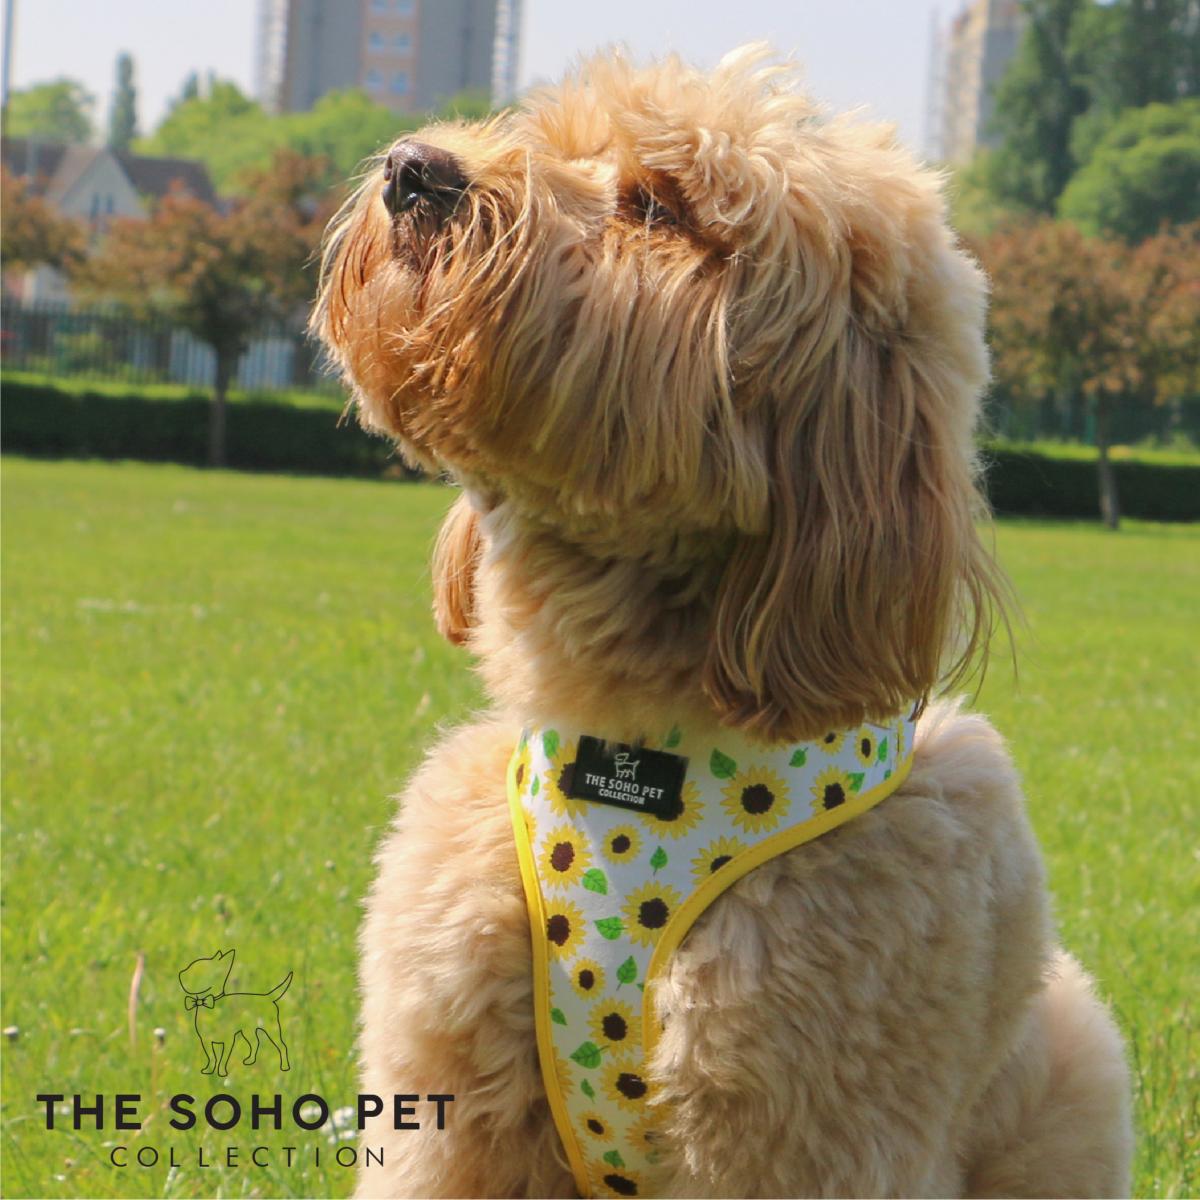 Ancol | Soho Collection | Dog Harness | Reversible Sunflower & Yellow Check Pattern